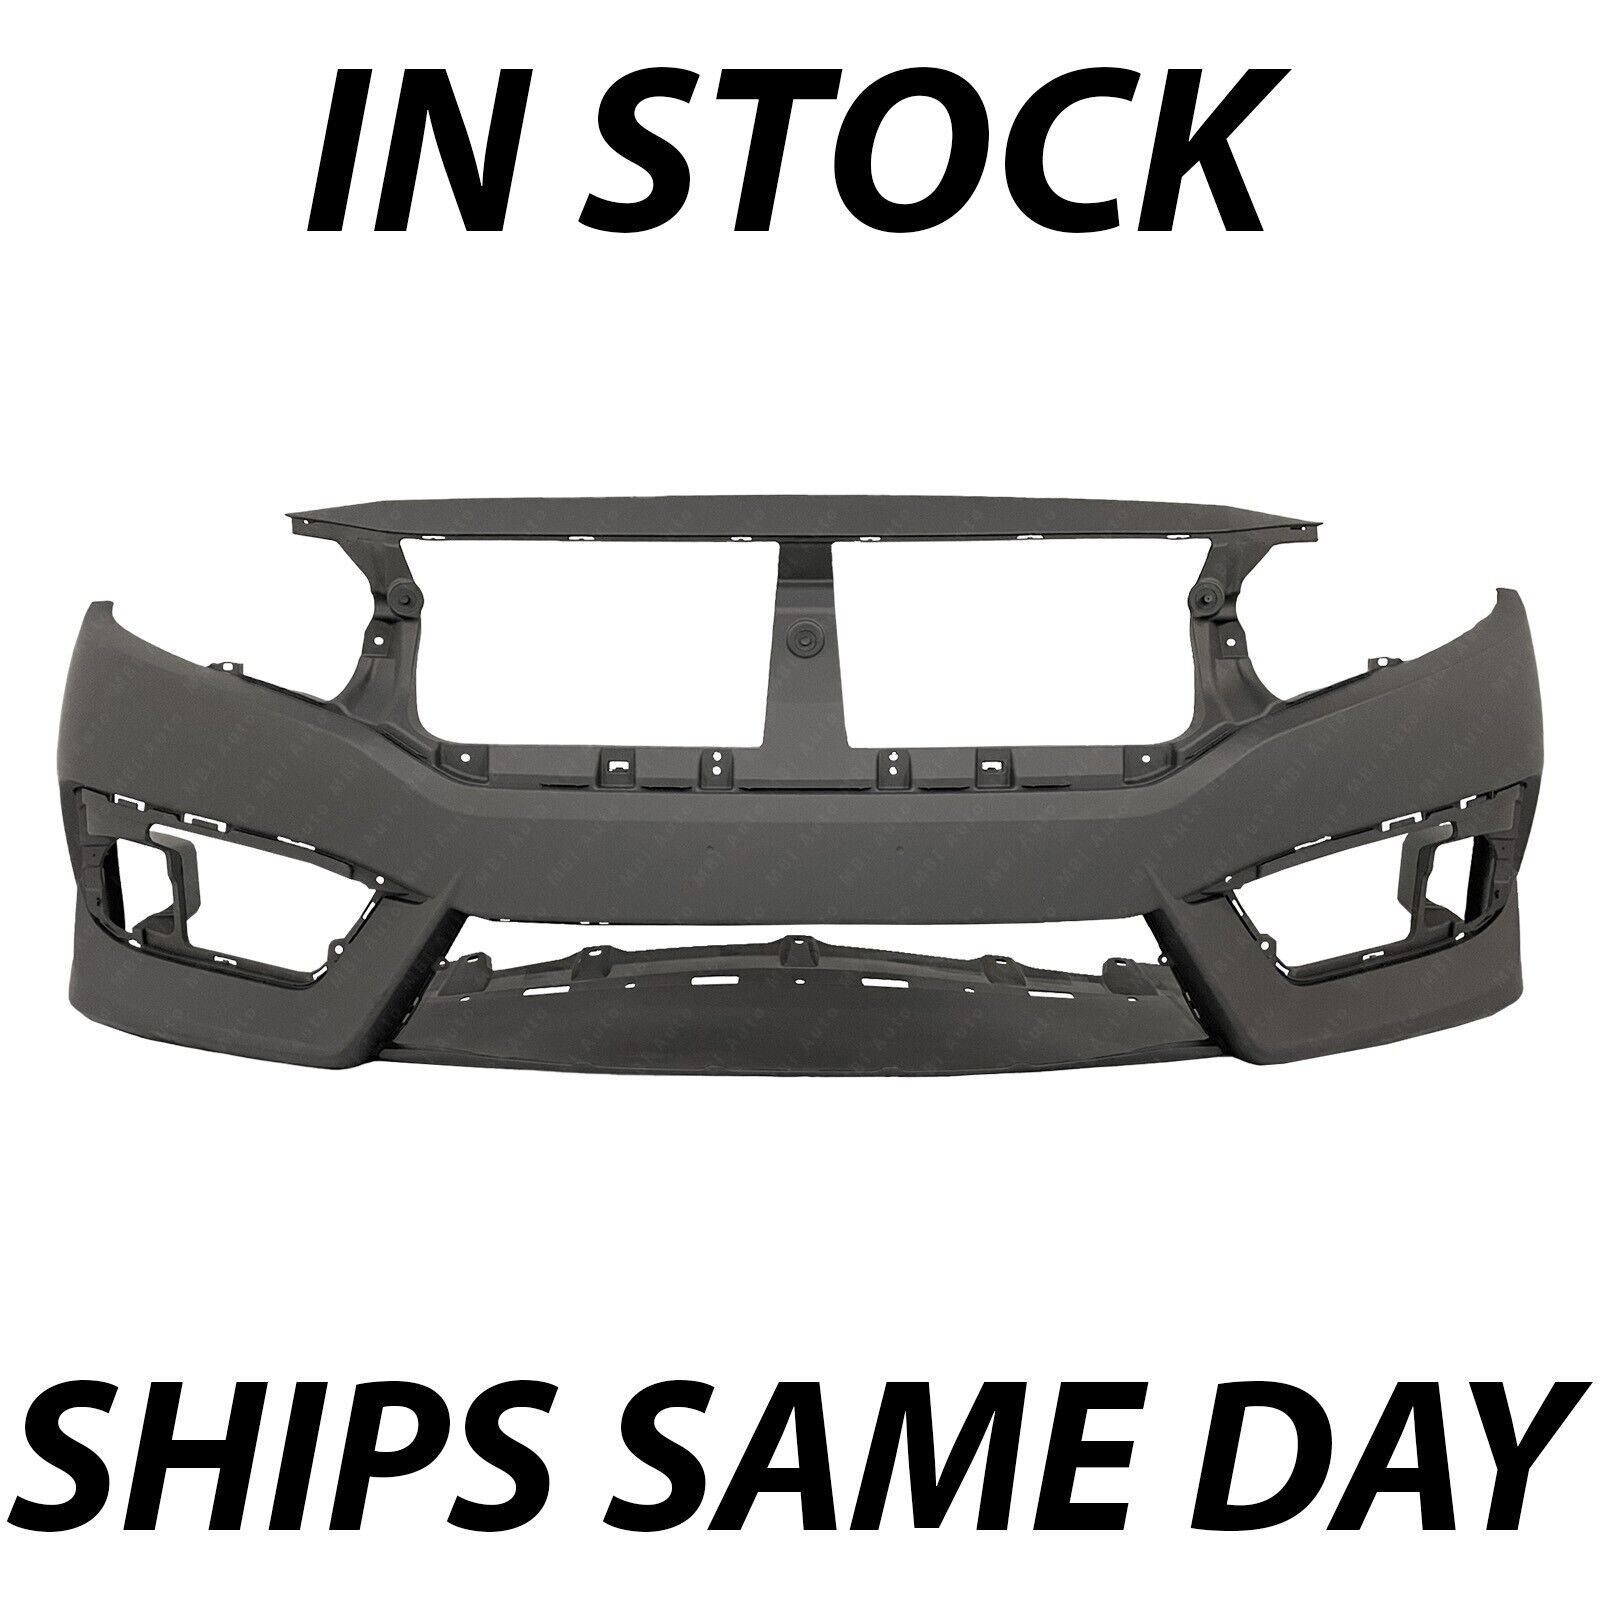 NEW Primered Front Bumper Cover for 2016-2018 Honda Civic Coupe/Sedan 16-18